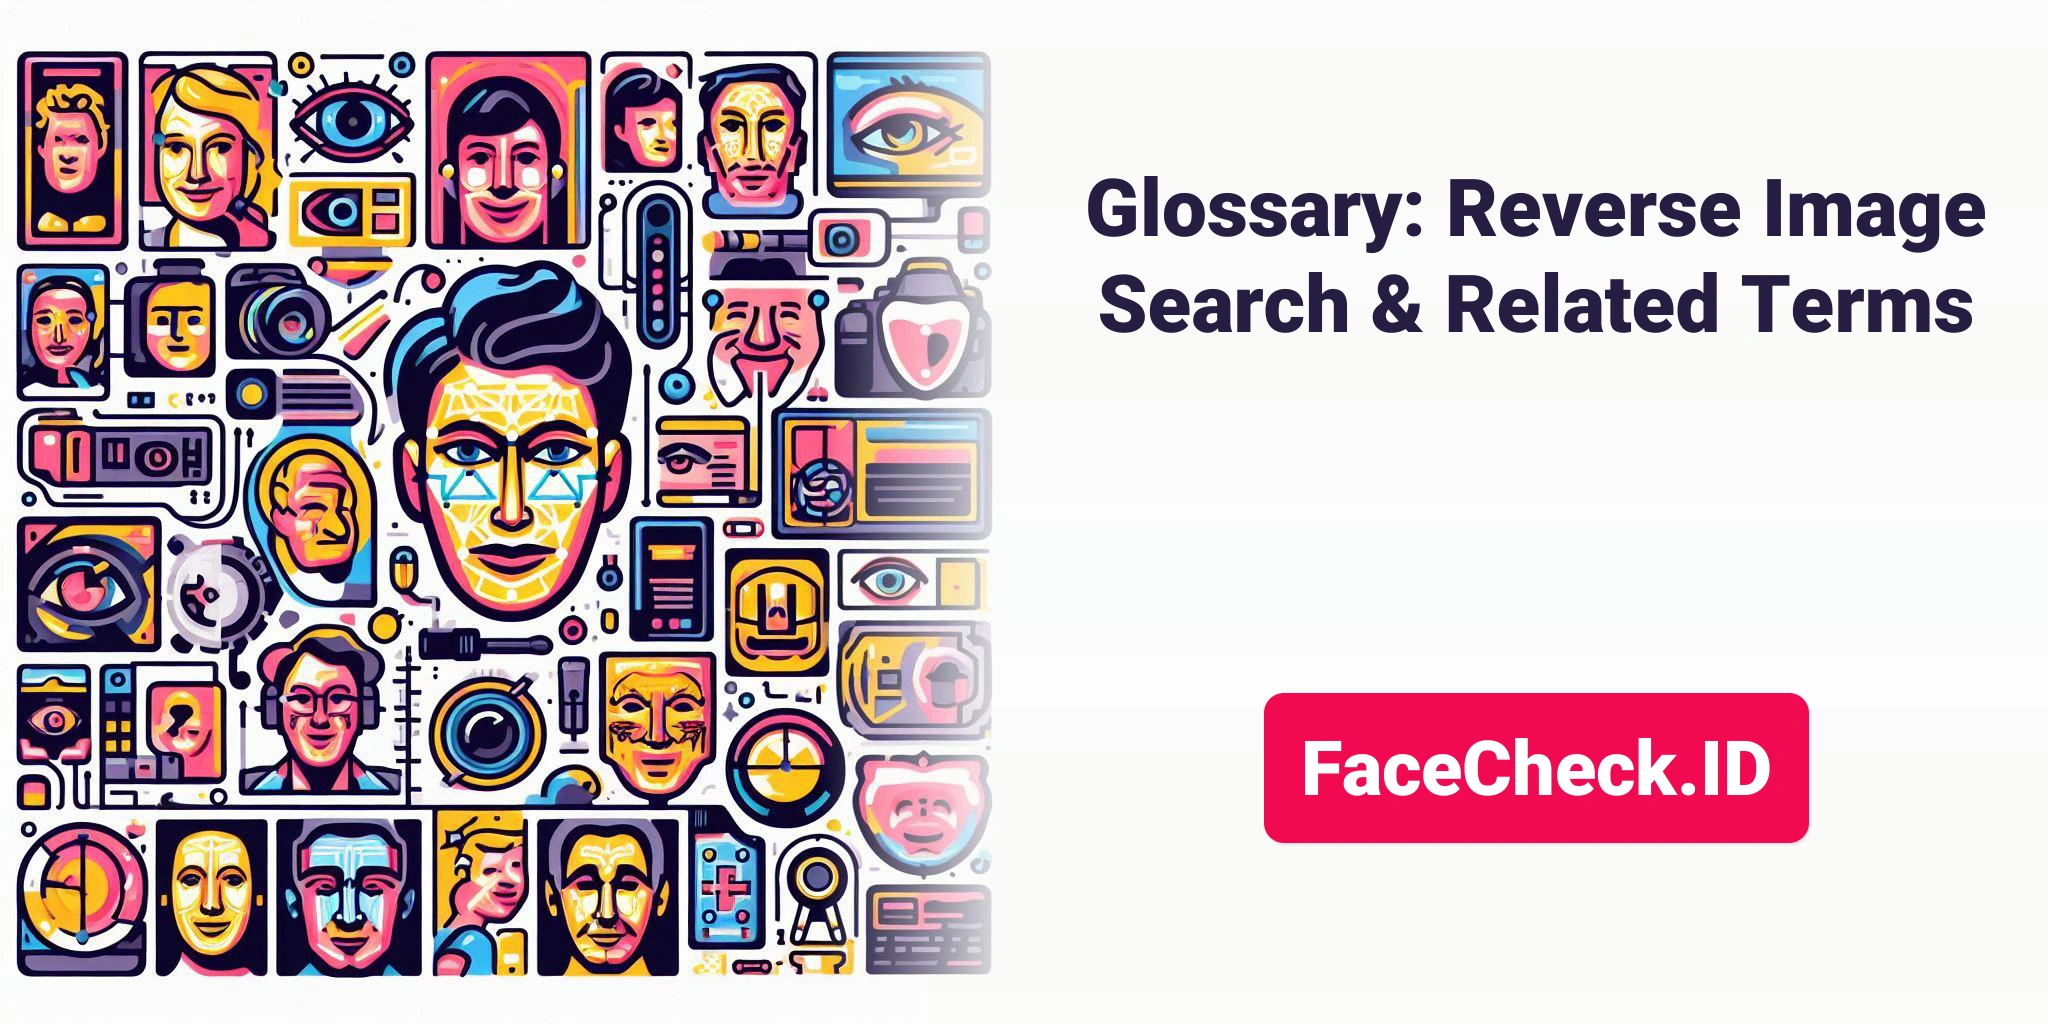 Glossary: Reverse Image Search & Related Terms FaceCheck.ID